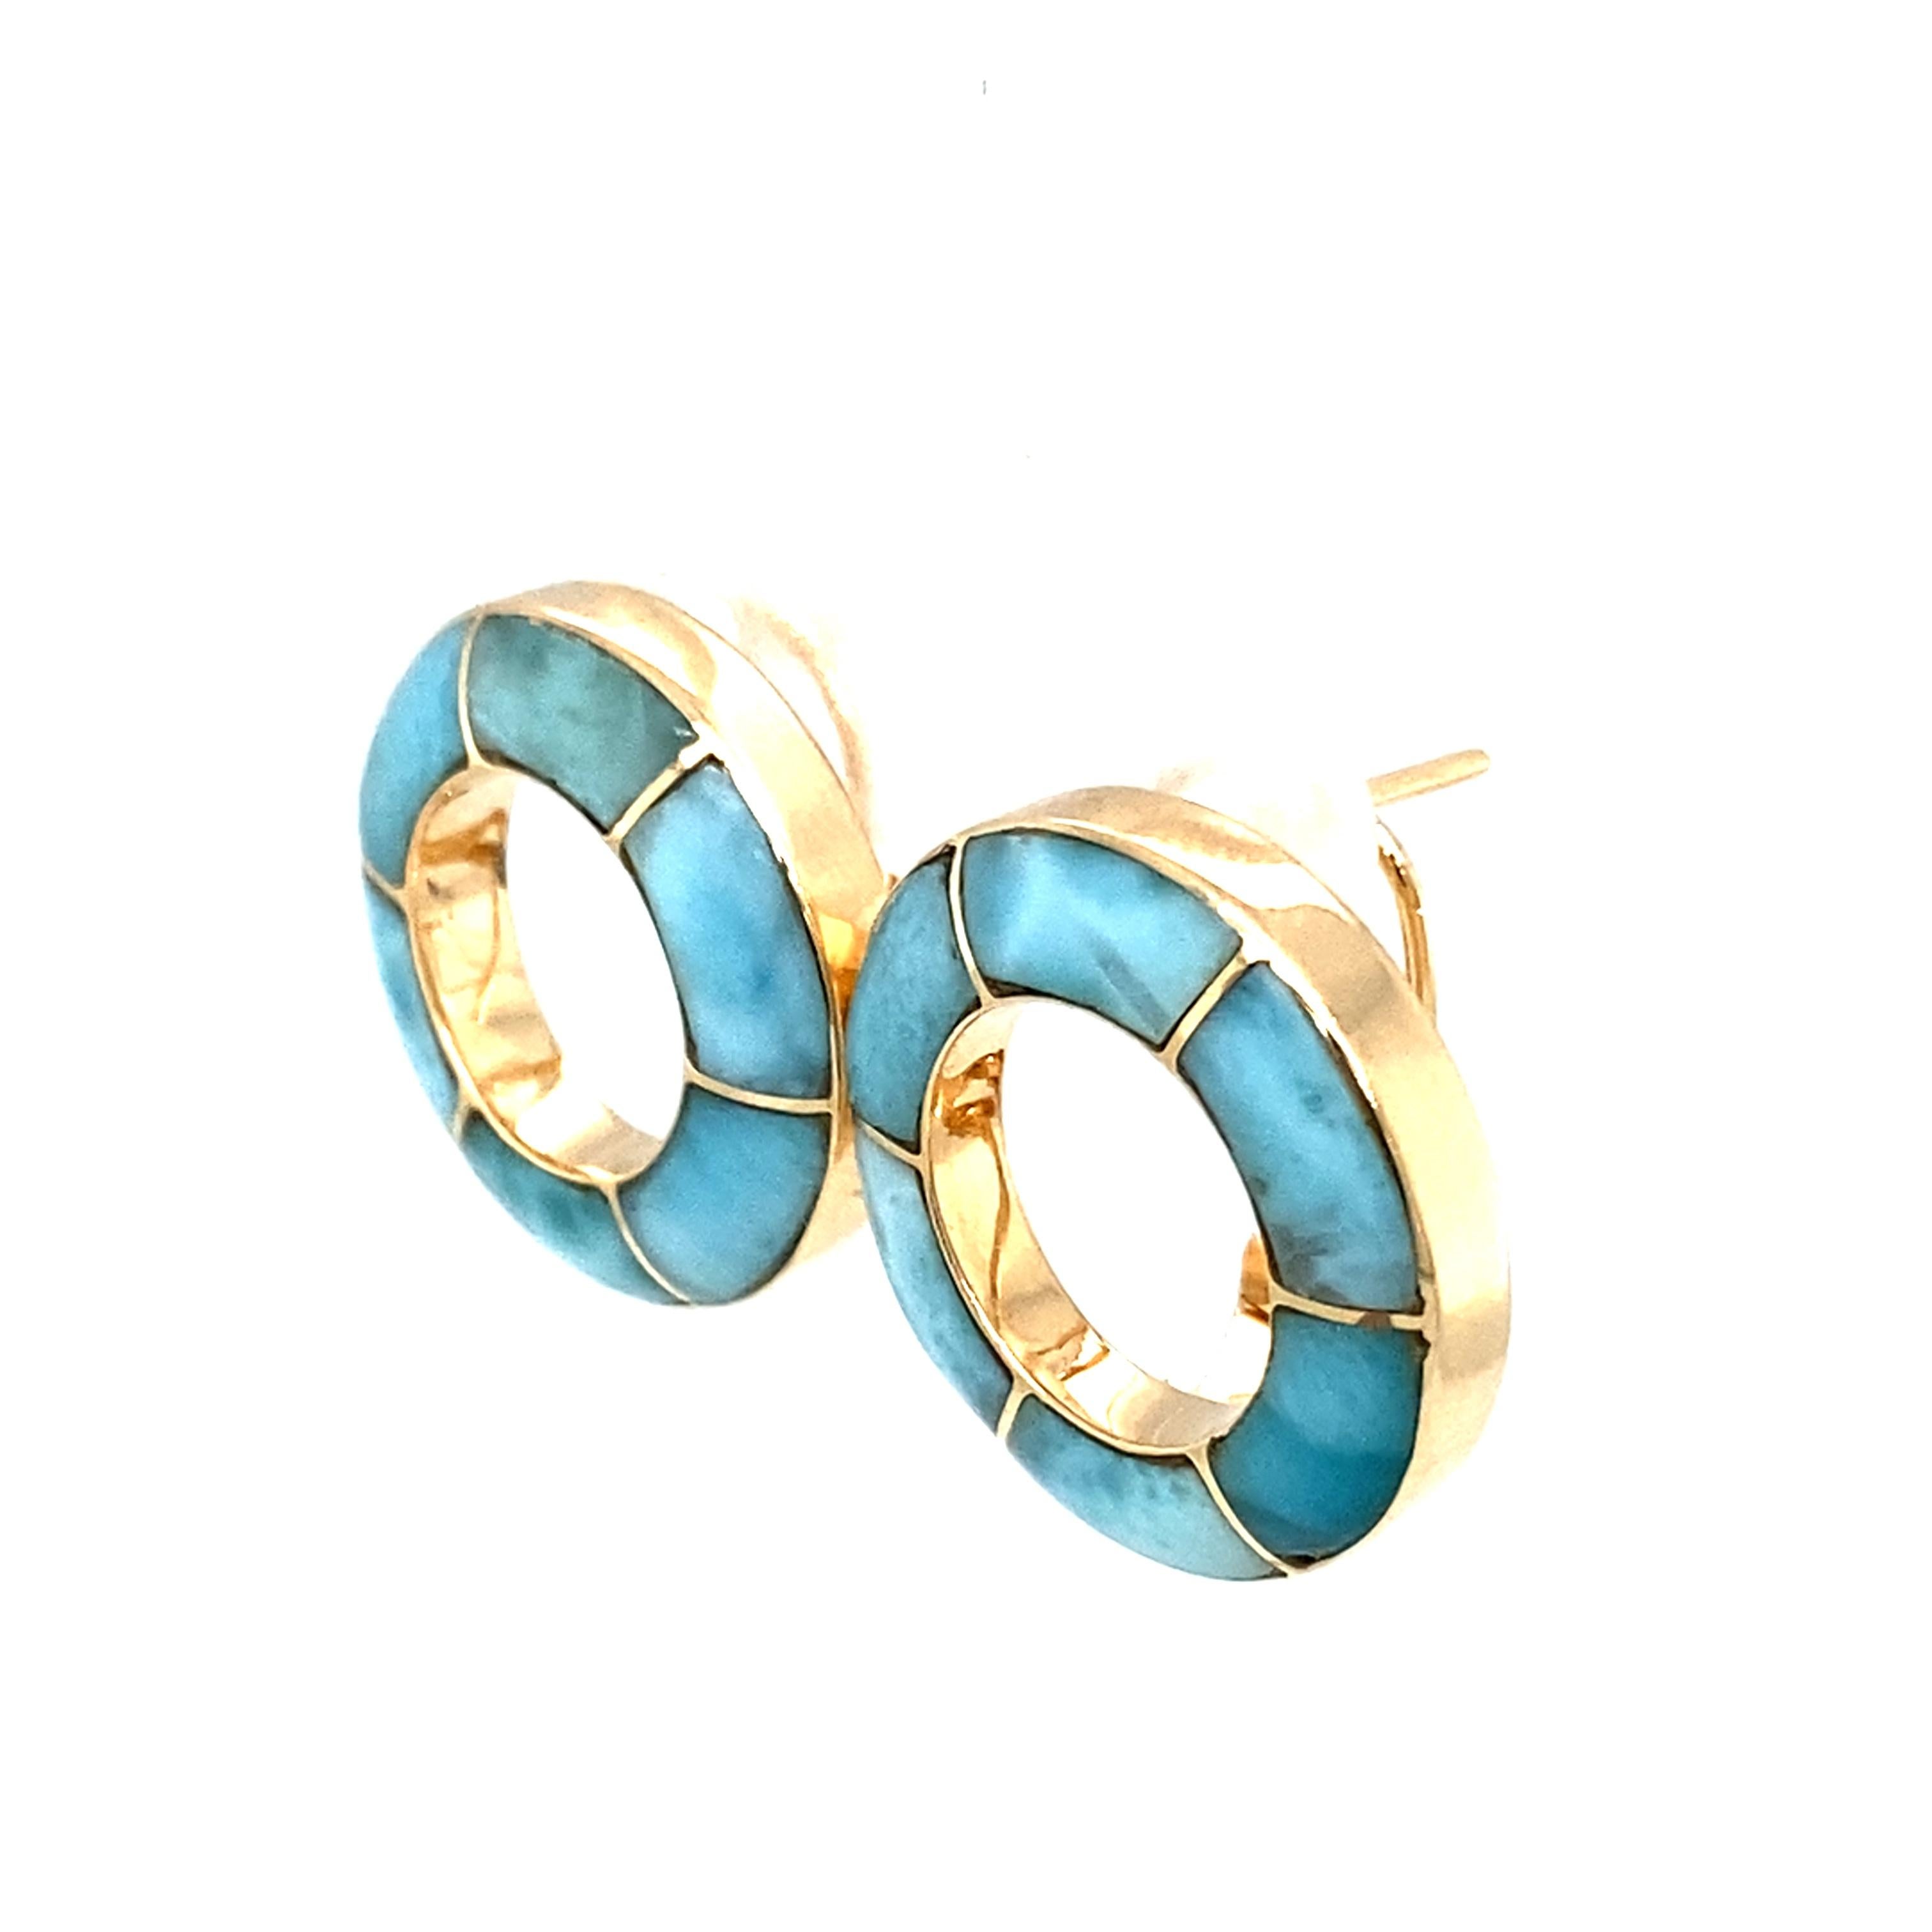 Beautiful earrings featuring Larimar Inlay and 14 karat yellow gold 
6.1 grams
Hallmarked 14K

Item Features:
Each earring features 6 segments of beautiful Larimar inlayed and separated by a thin piece of gold, the pattern continues around creating